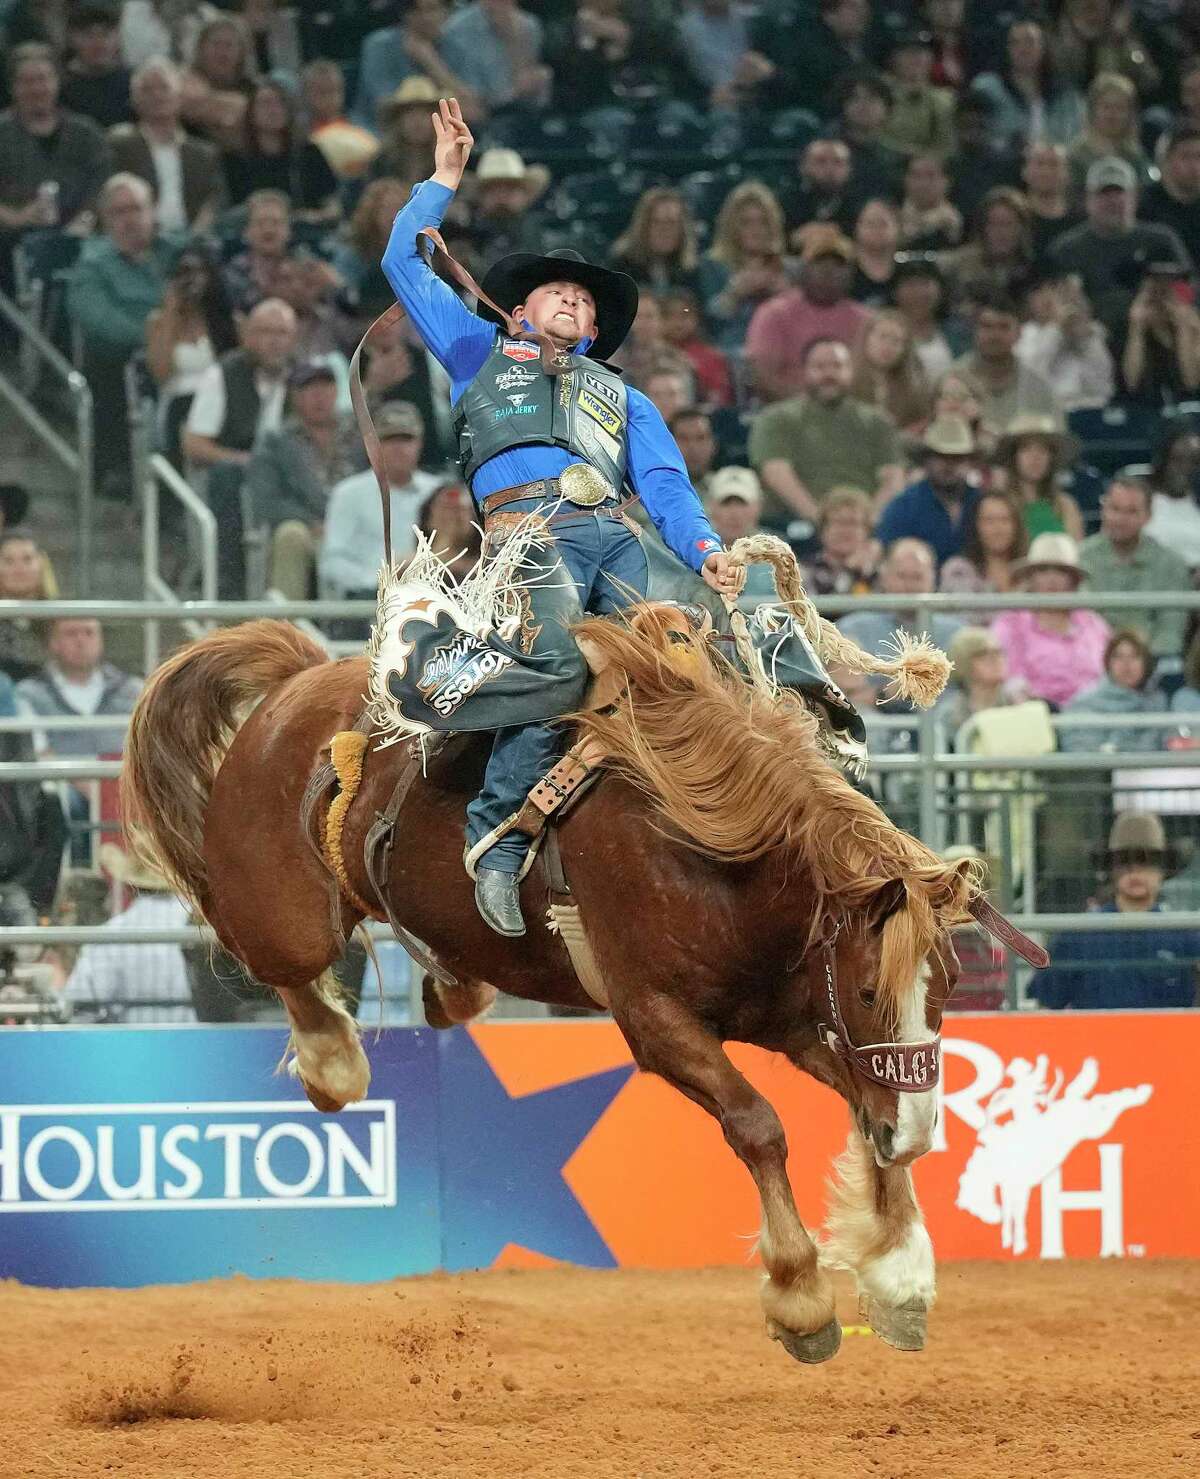 Rusty Wright ridges Zastron Acres in the saddle bronc riding competition during the Semifinal 2 round of Rodeo Houston at the Houston Livestock Show and Rodeo at NRG Park on Thursday, March 16, 2023 in Houston.